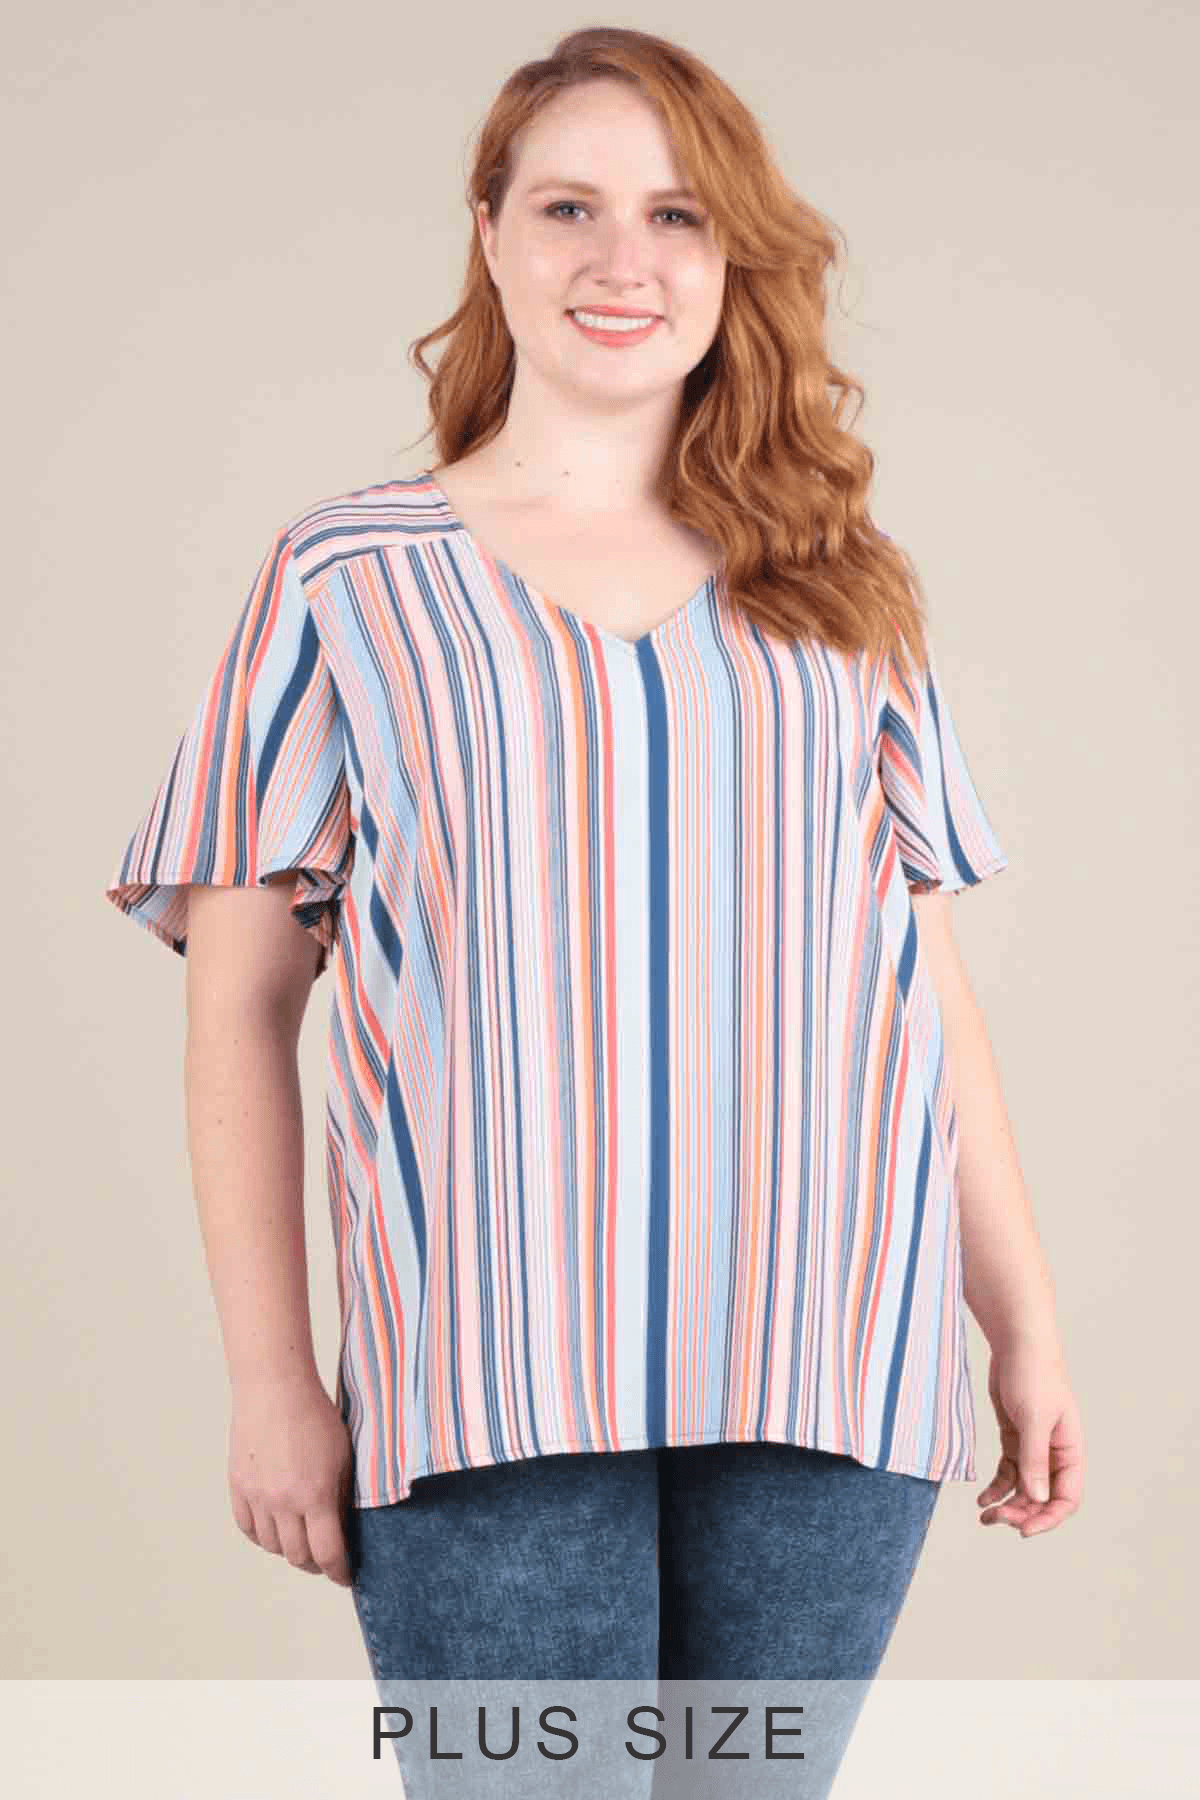 Diane Vertical Logo - Diane Vertical Striped Top. Women's Plus Size Tops. SKIES ARE BLUE